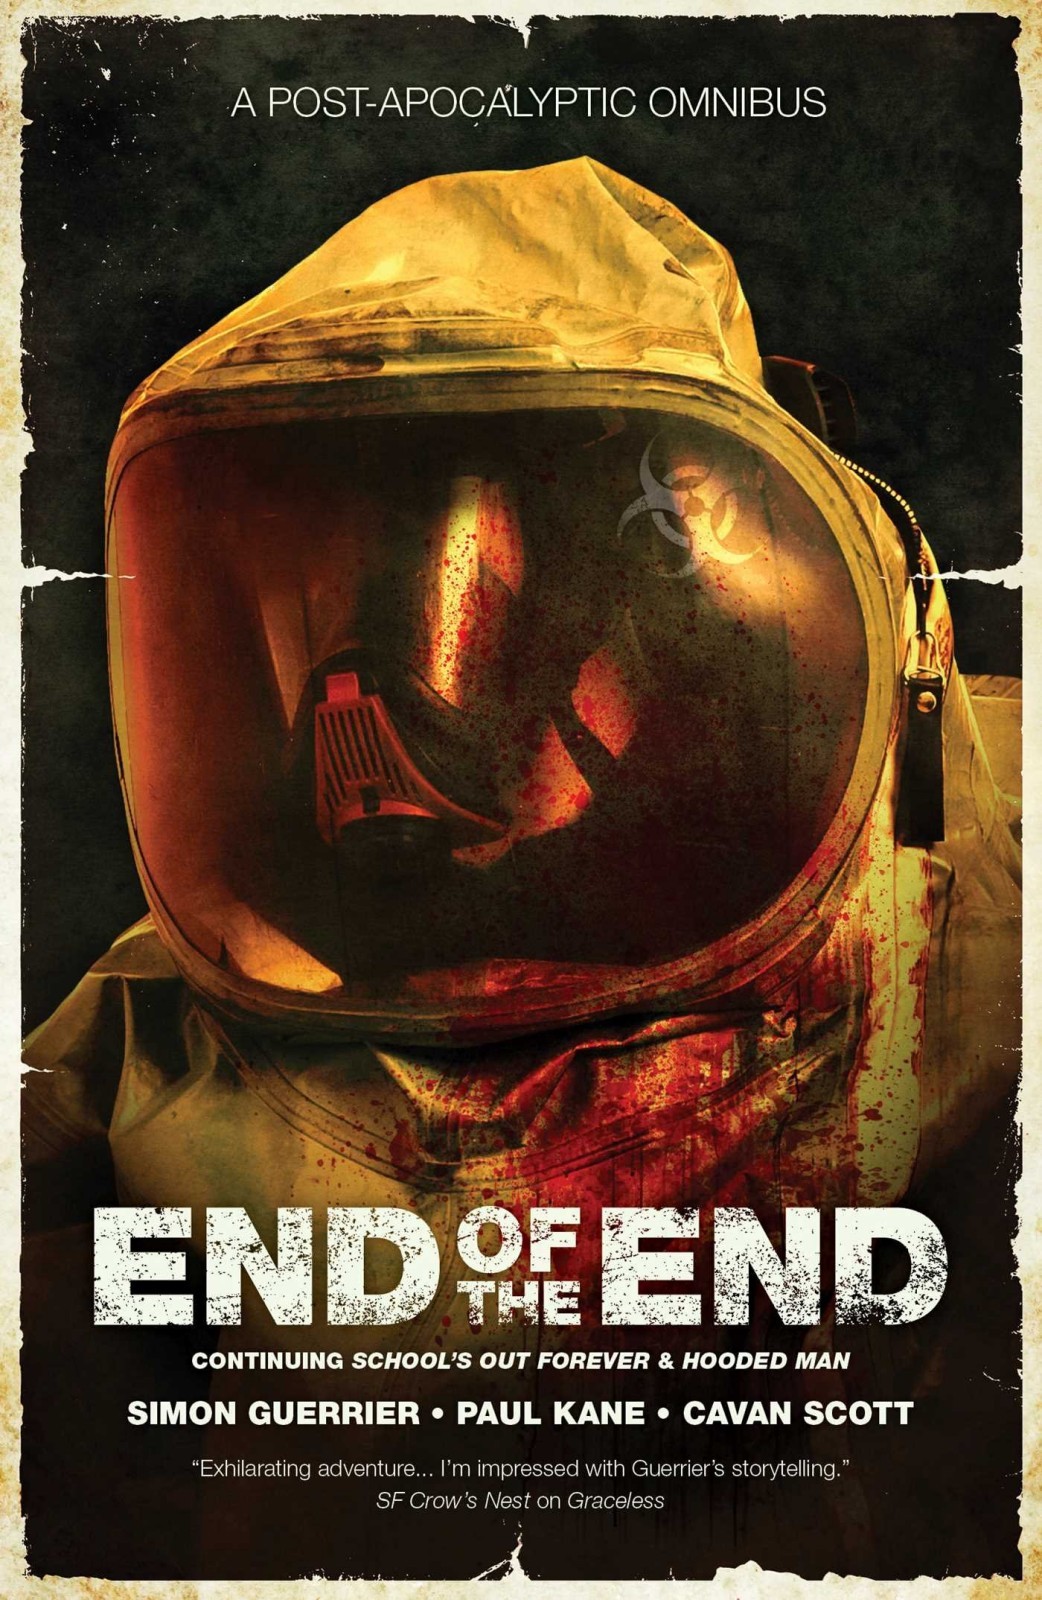 The End of the End: An Omnibus of Post-Apocalyptic Fiction